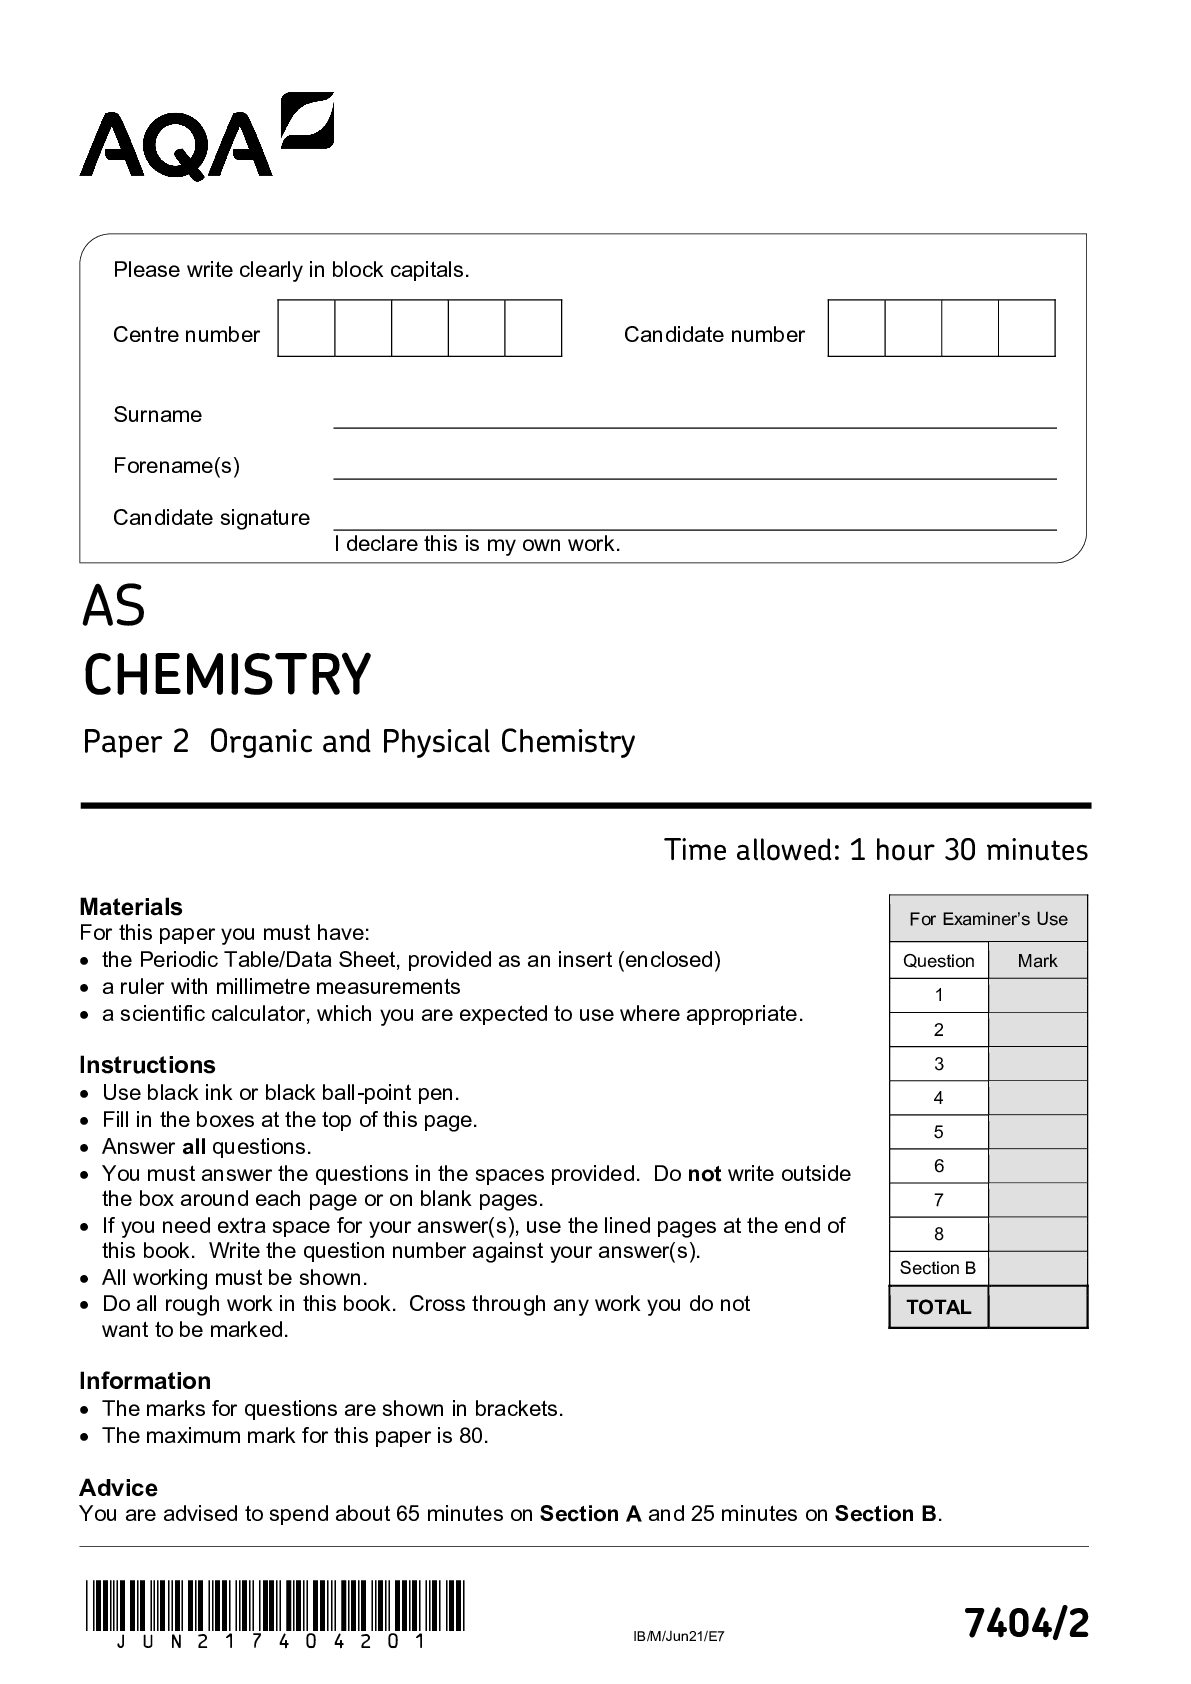 7404 2 QP Chemistry AS 12 Oct 21